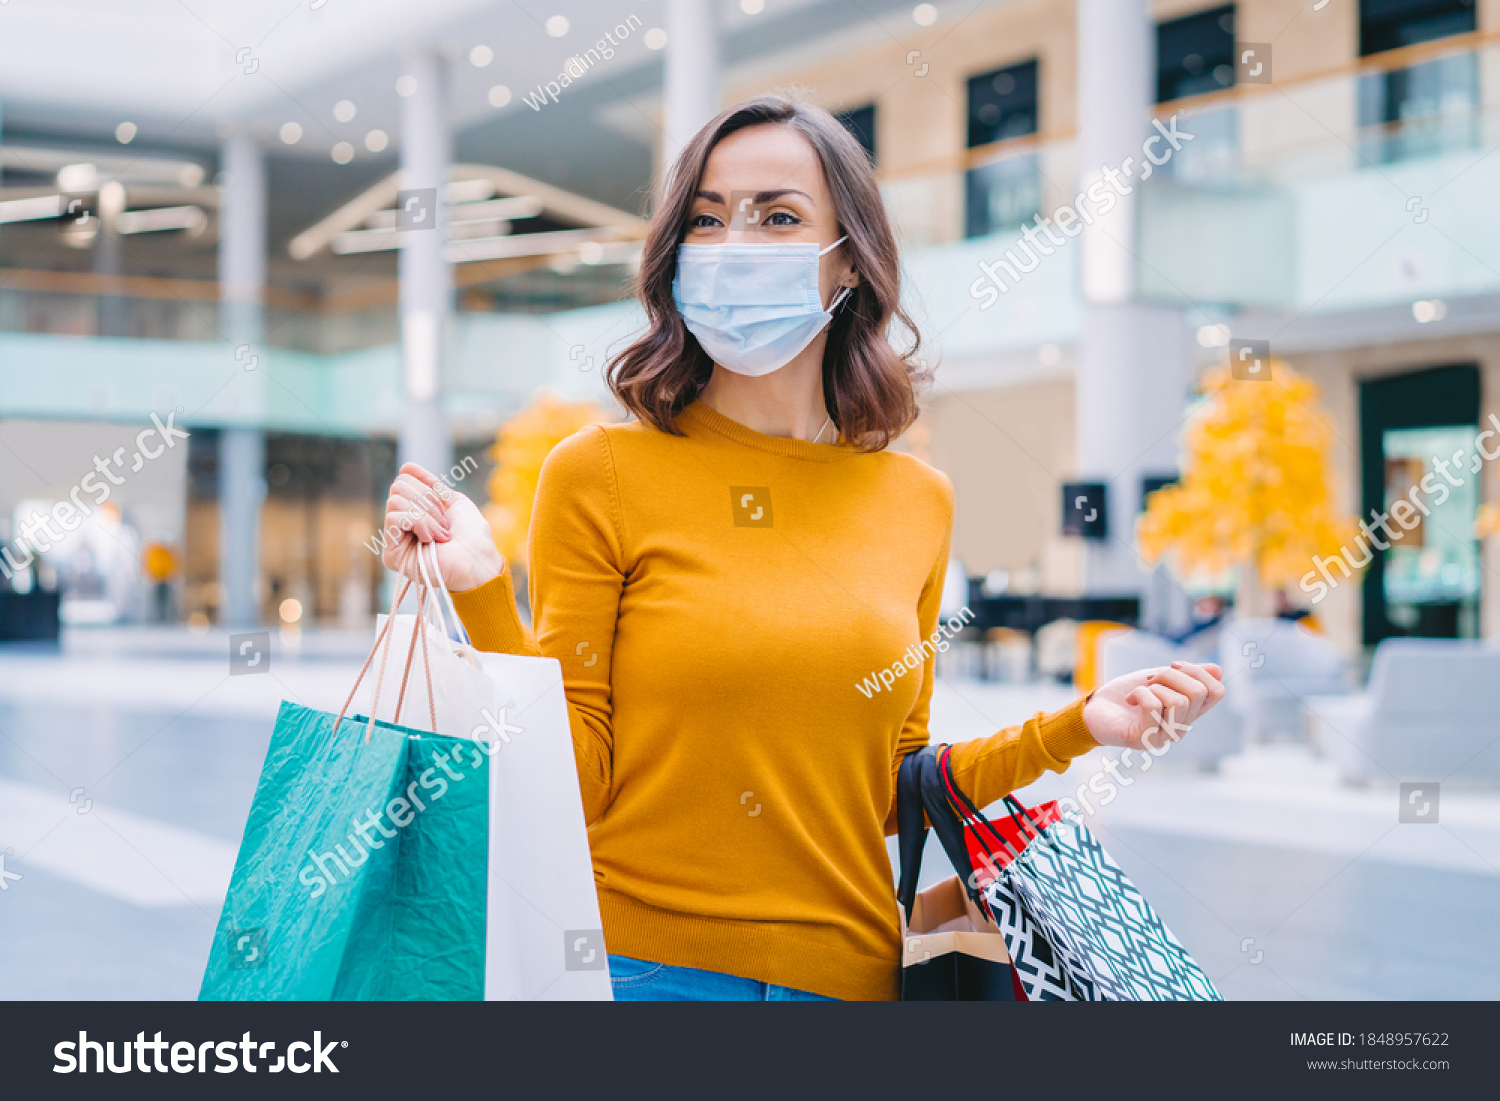 Portrait of casually dressed confident young woman wearing protecting medical mask while walking in mall with bunch of shopping bags in hands. Black friday sales concept. #1848957622